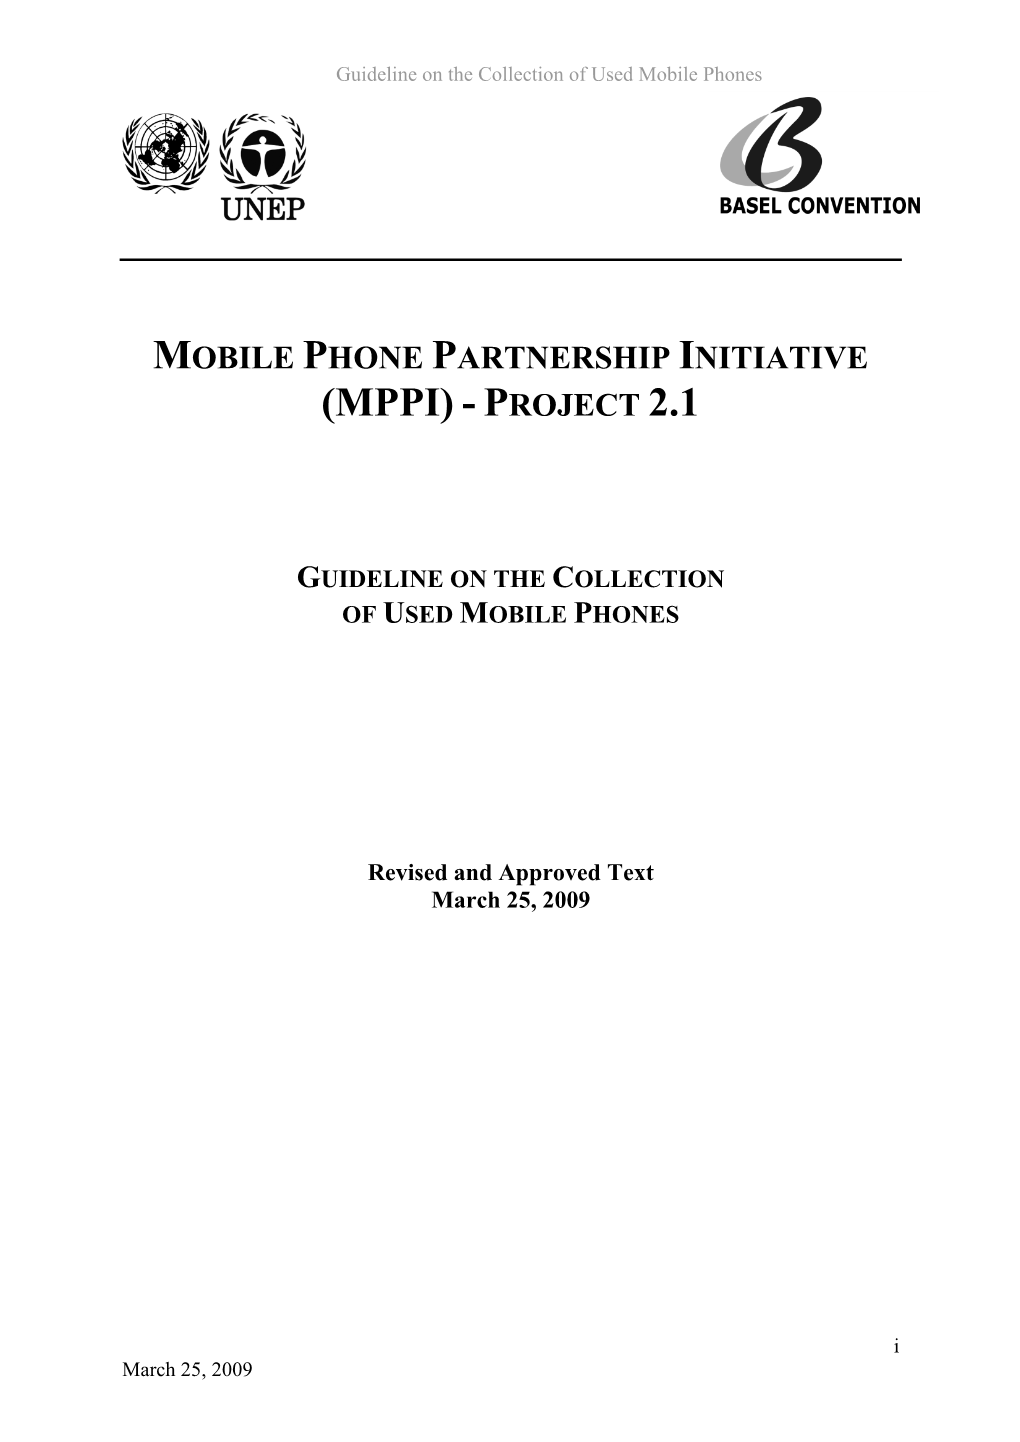 Collection and Transboundary Movement of Mobile Phones